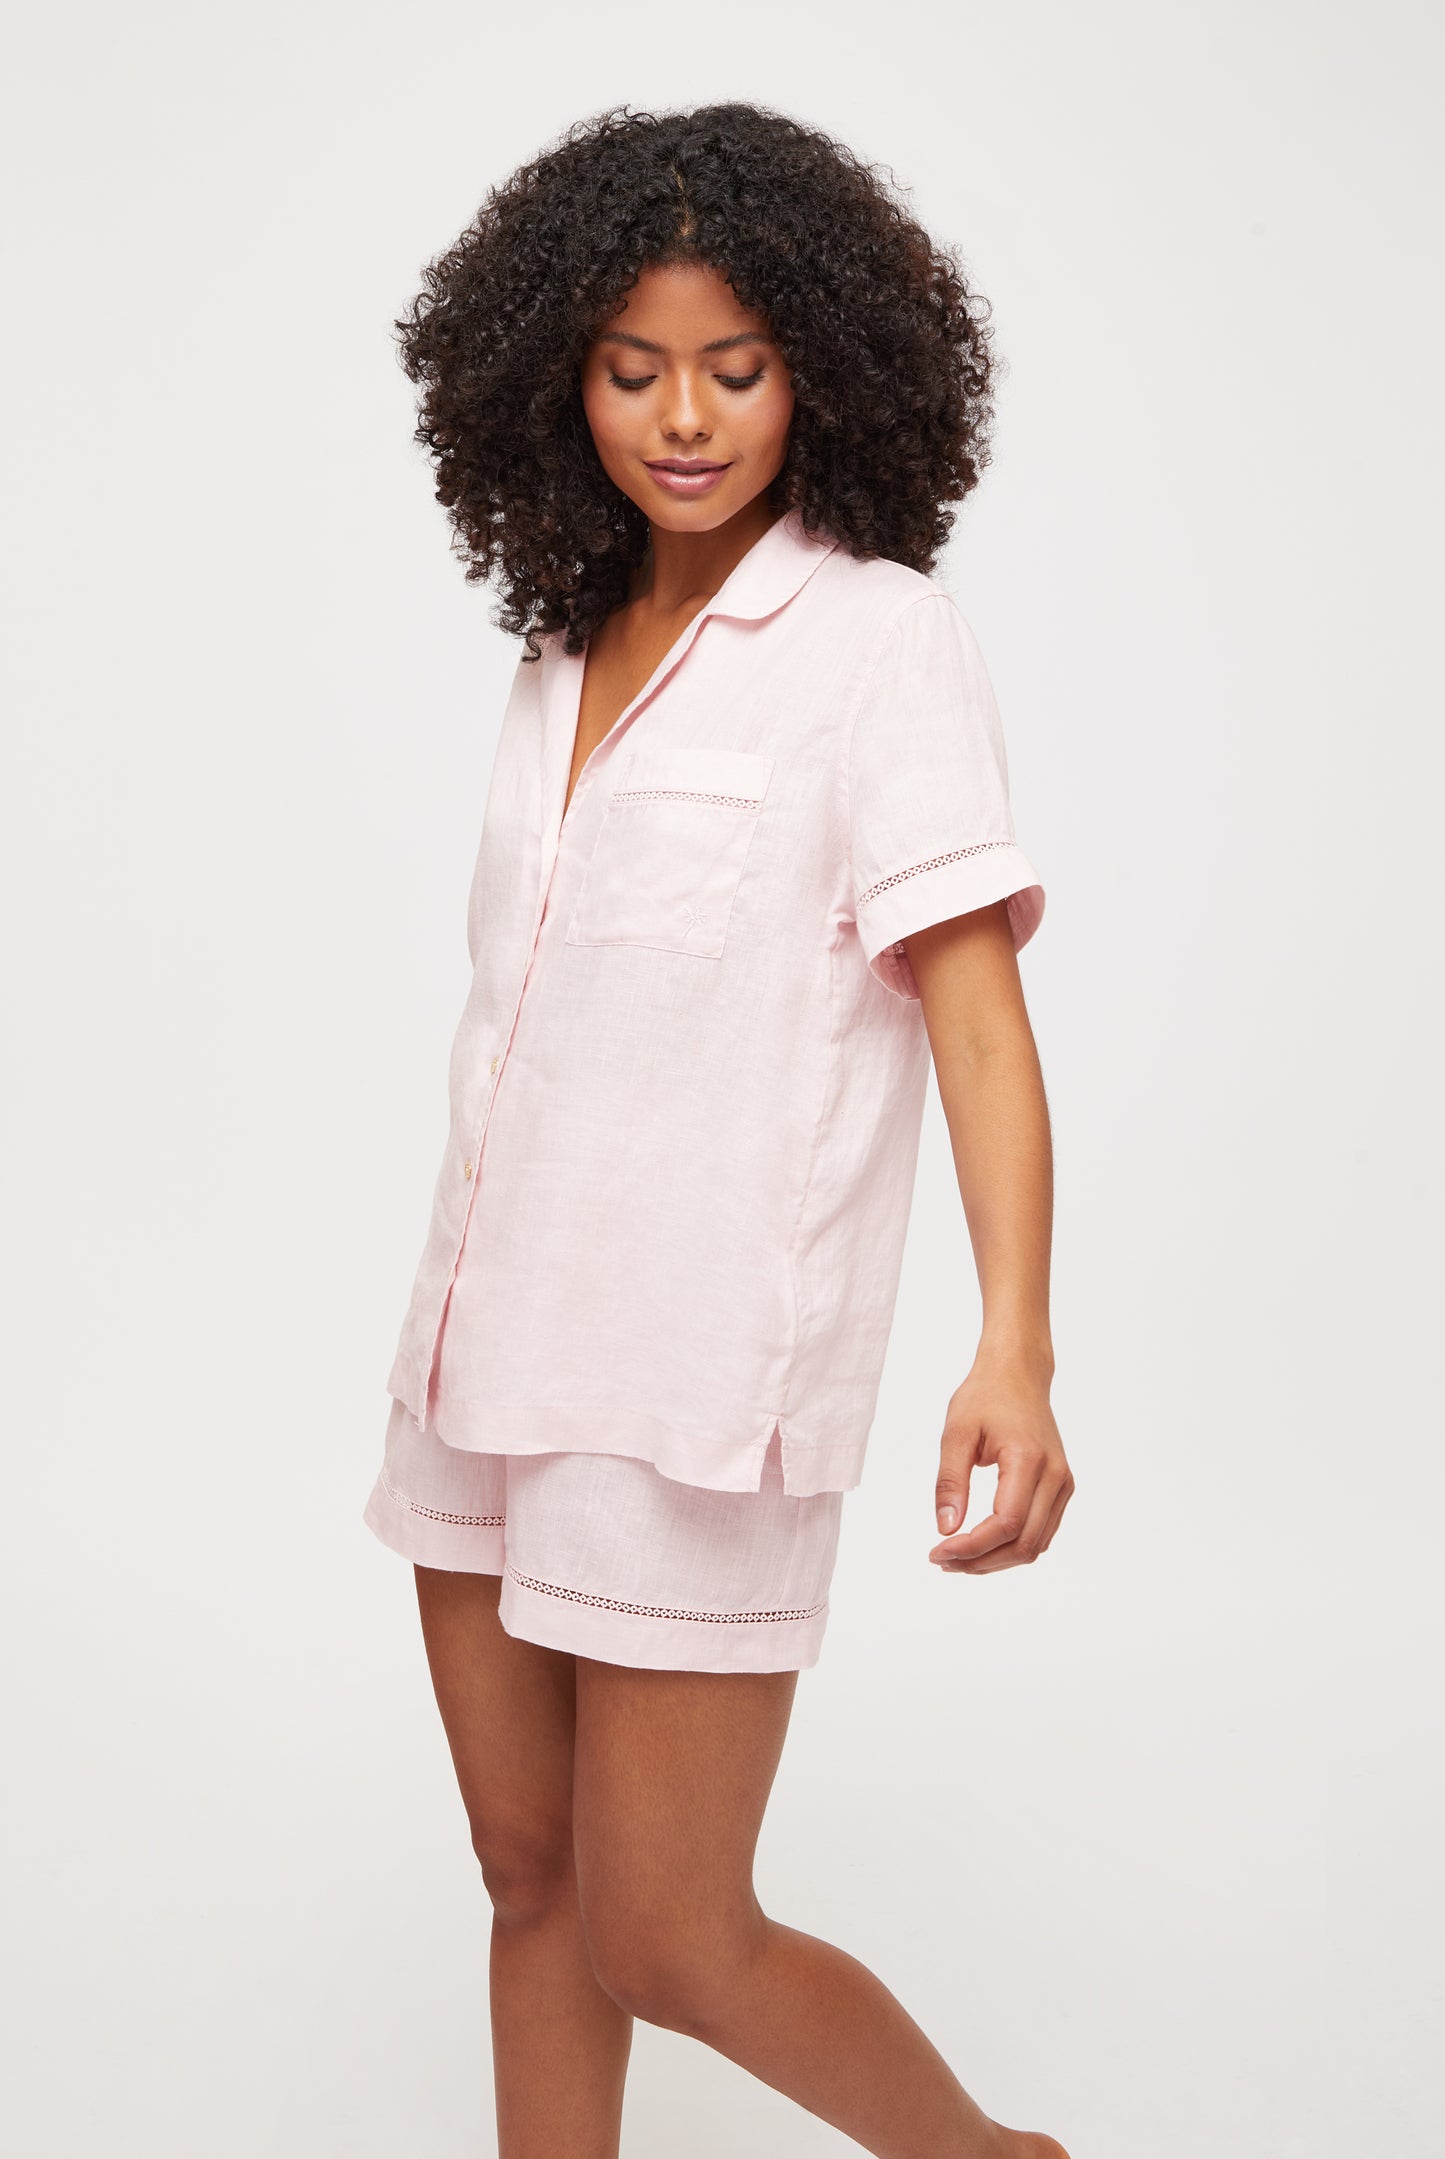 Paignton Sands Short Sleeve Top and Shorts Set